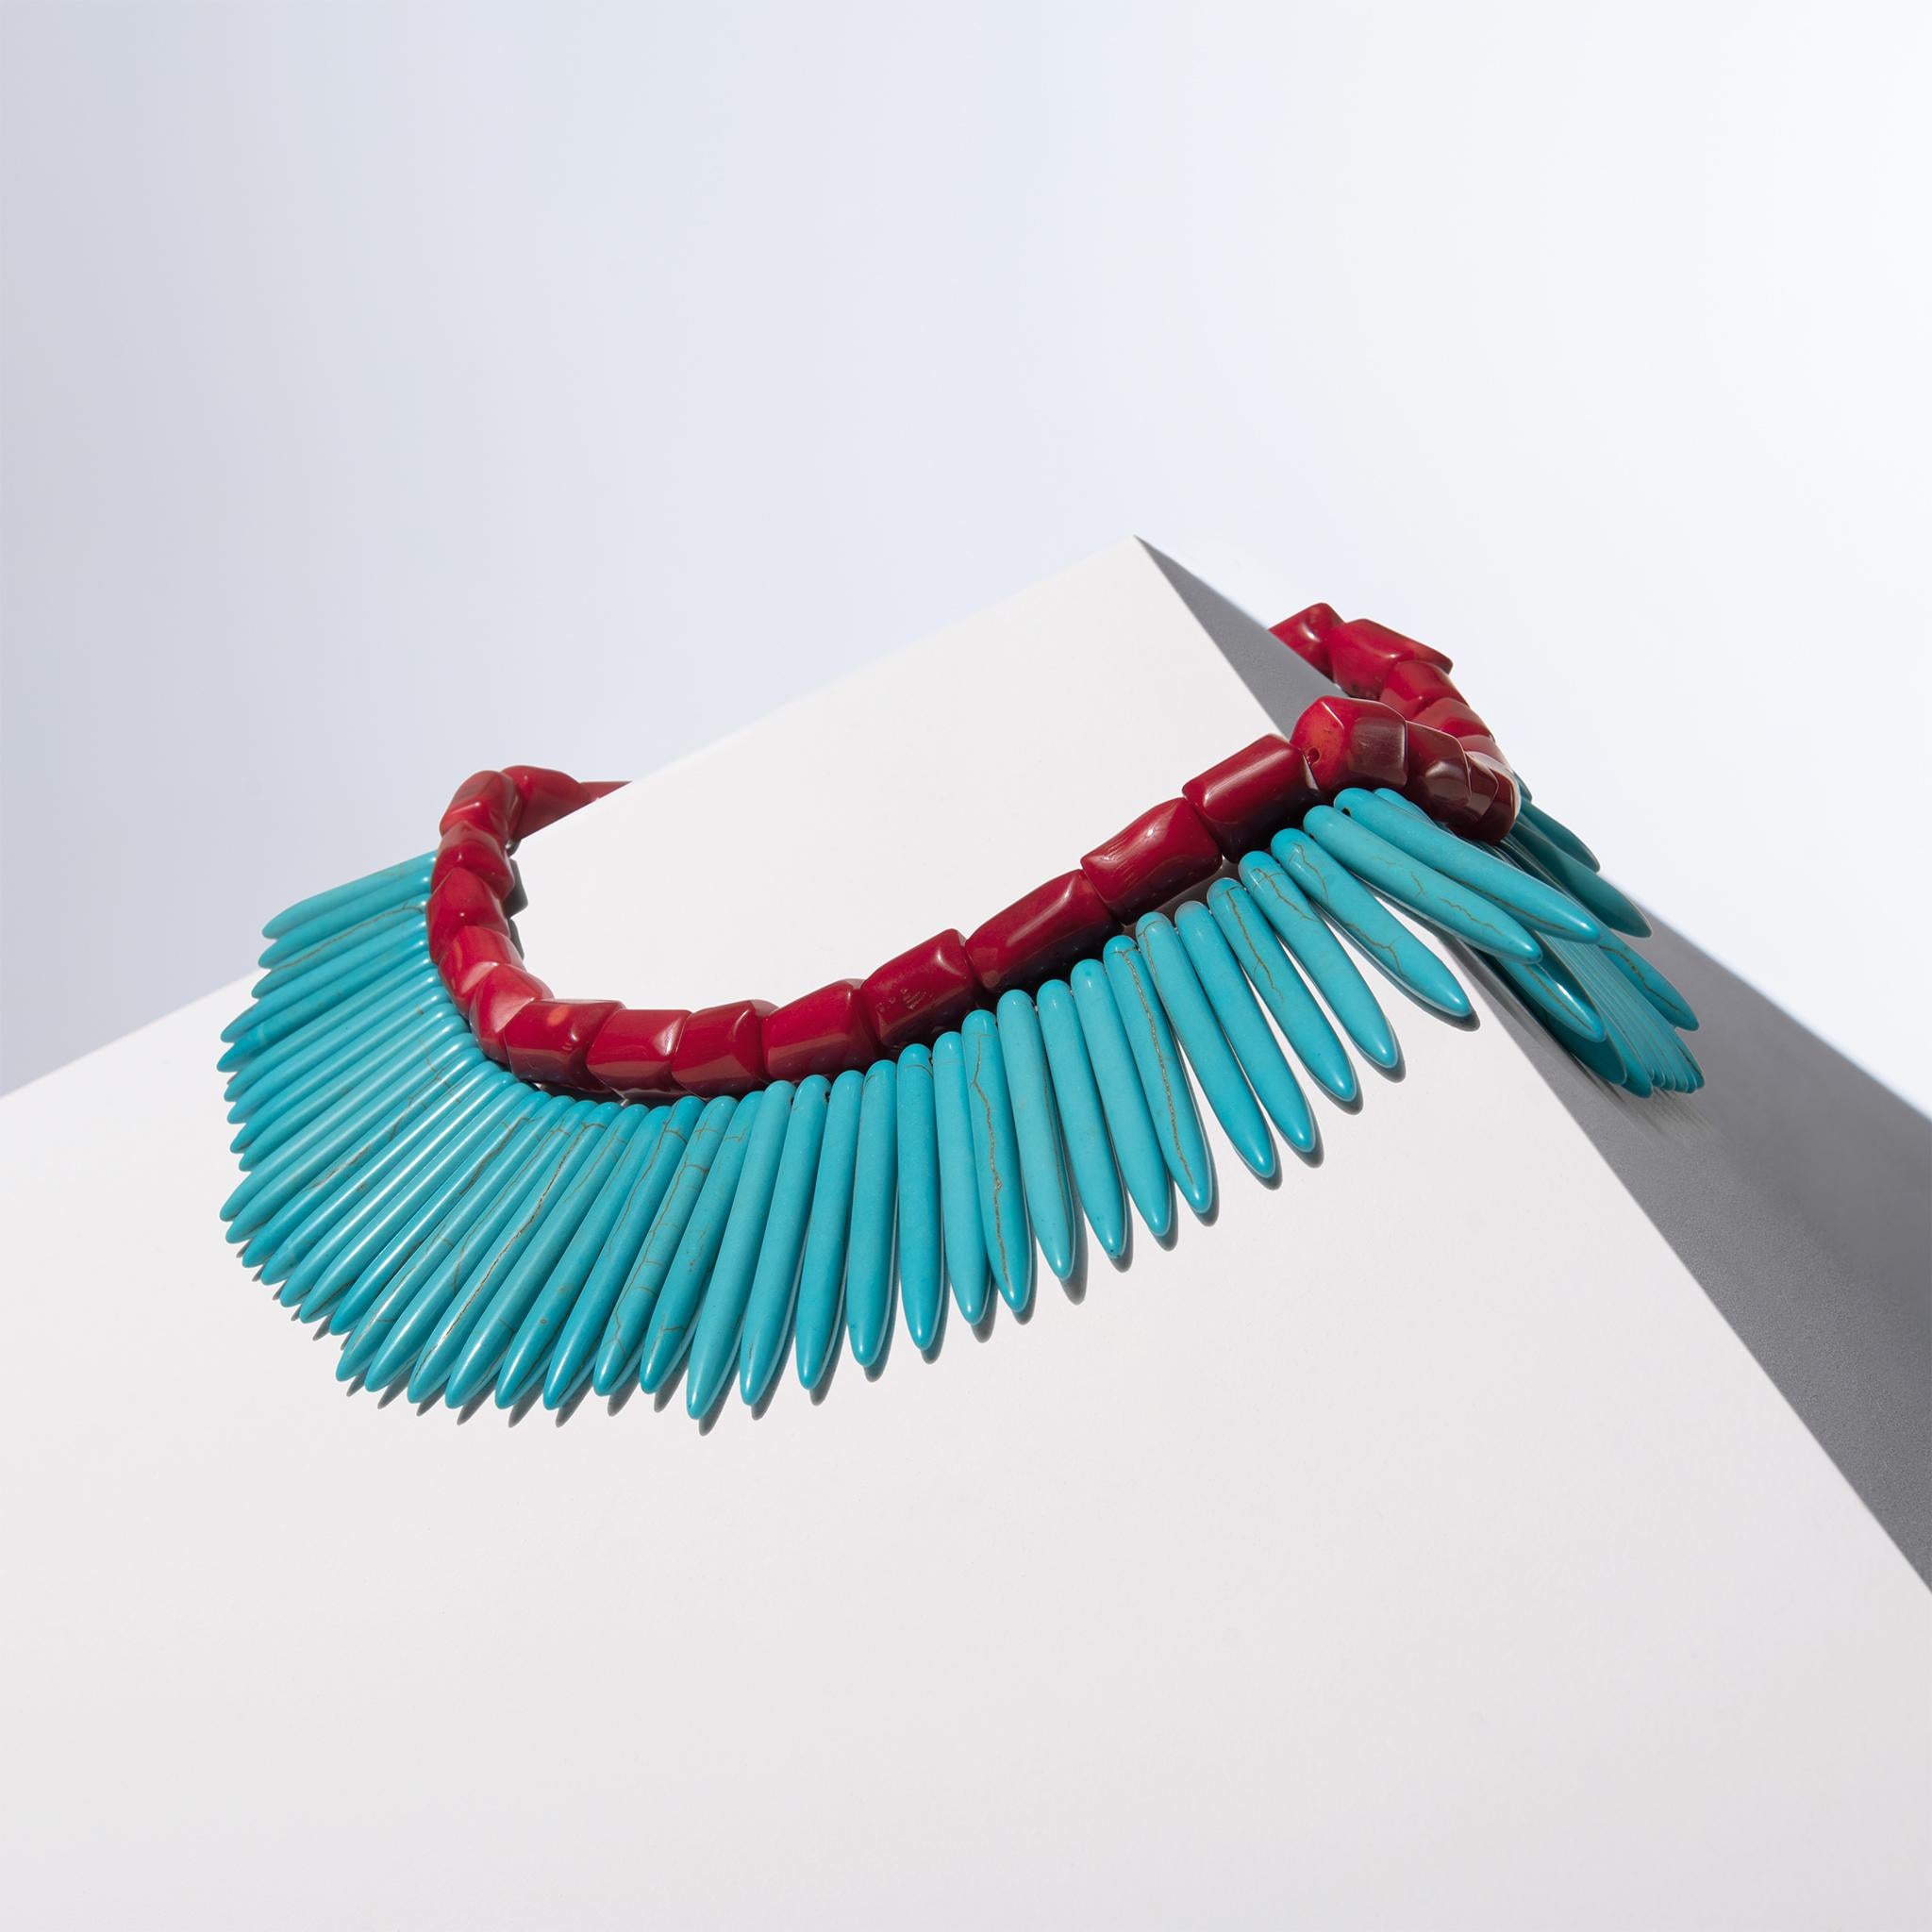 - This set features two distinct necklaces, one with red corals and the other with Blue Howlite, offering versatility to mix and match for varied styling options.
- The White Coral row measures 40 cm/ 15.7 inch and weighs 120g, while the Black